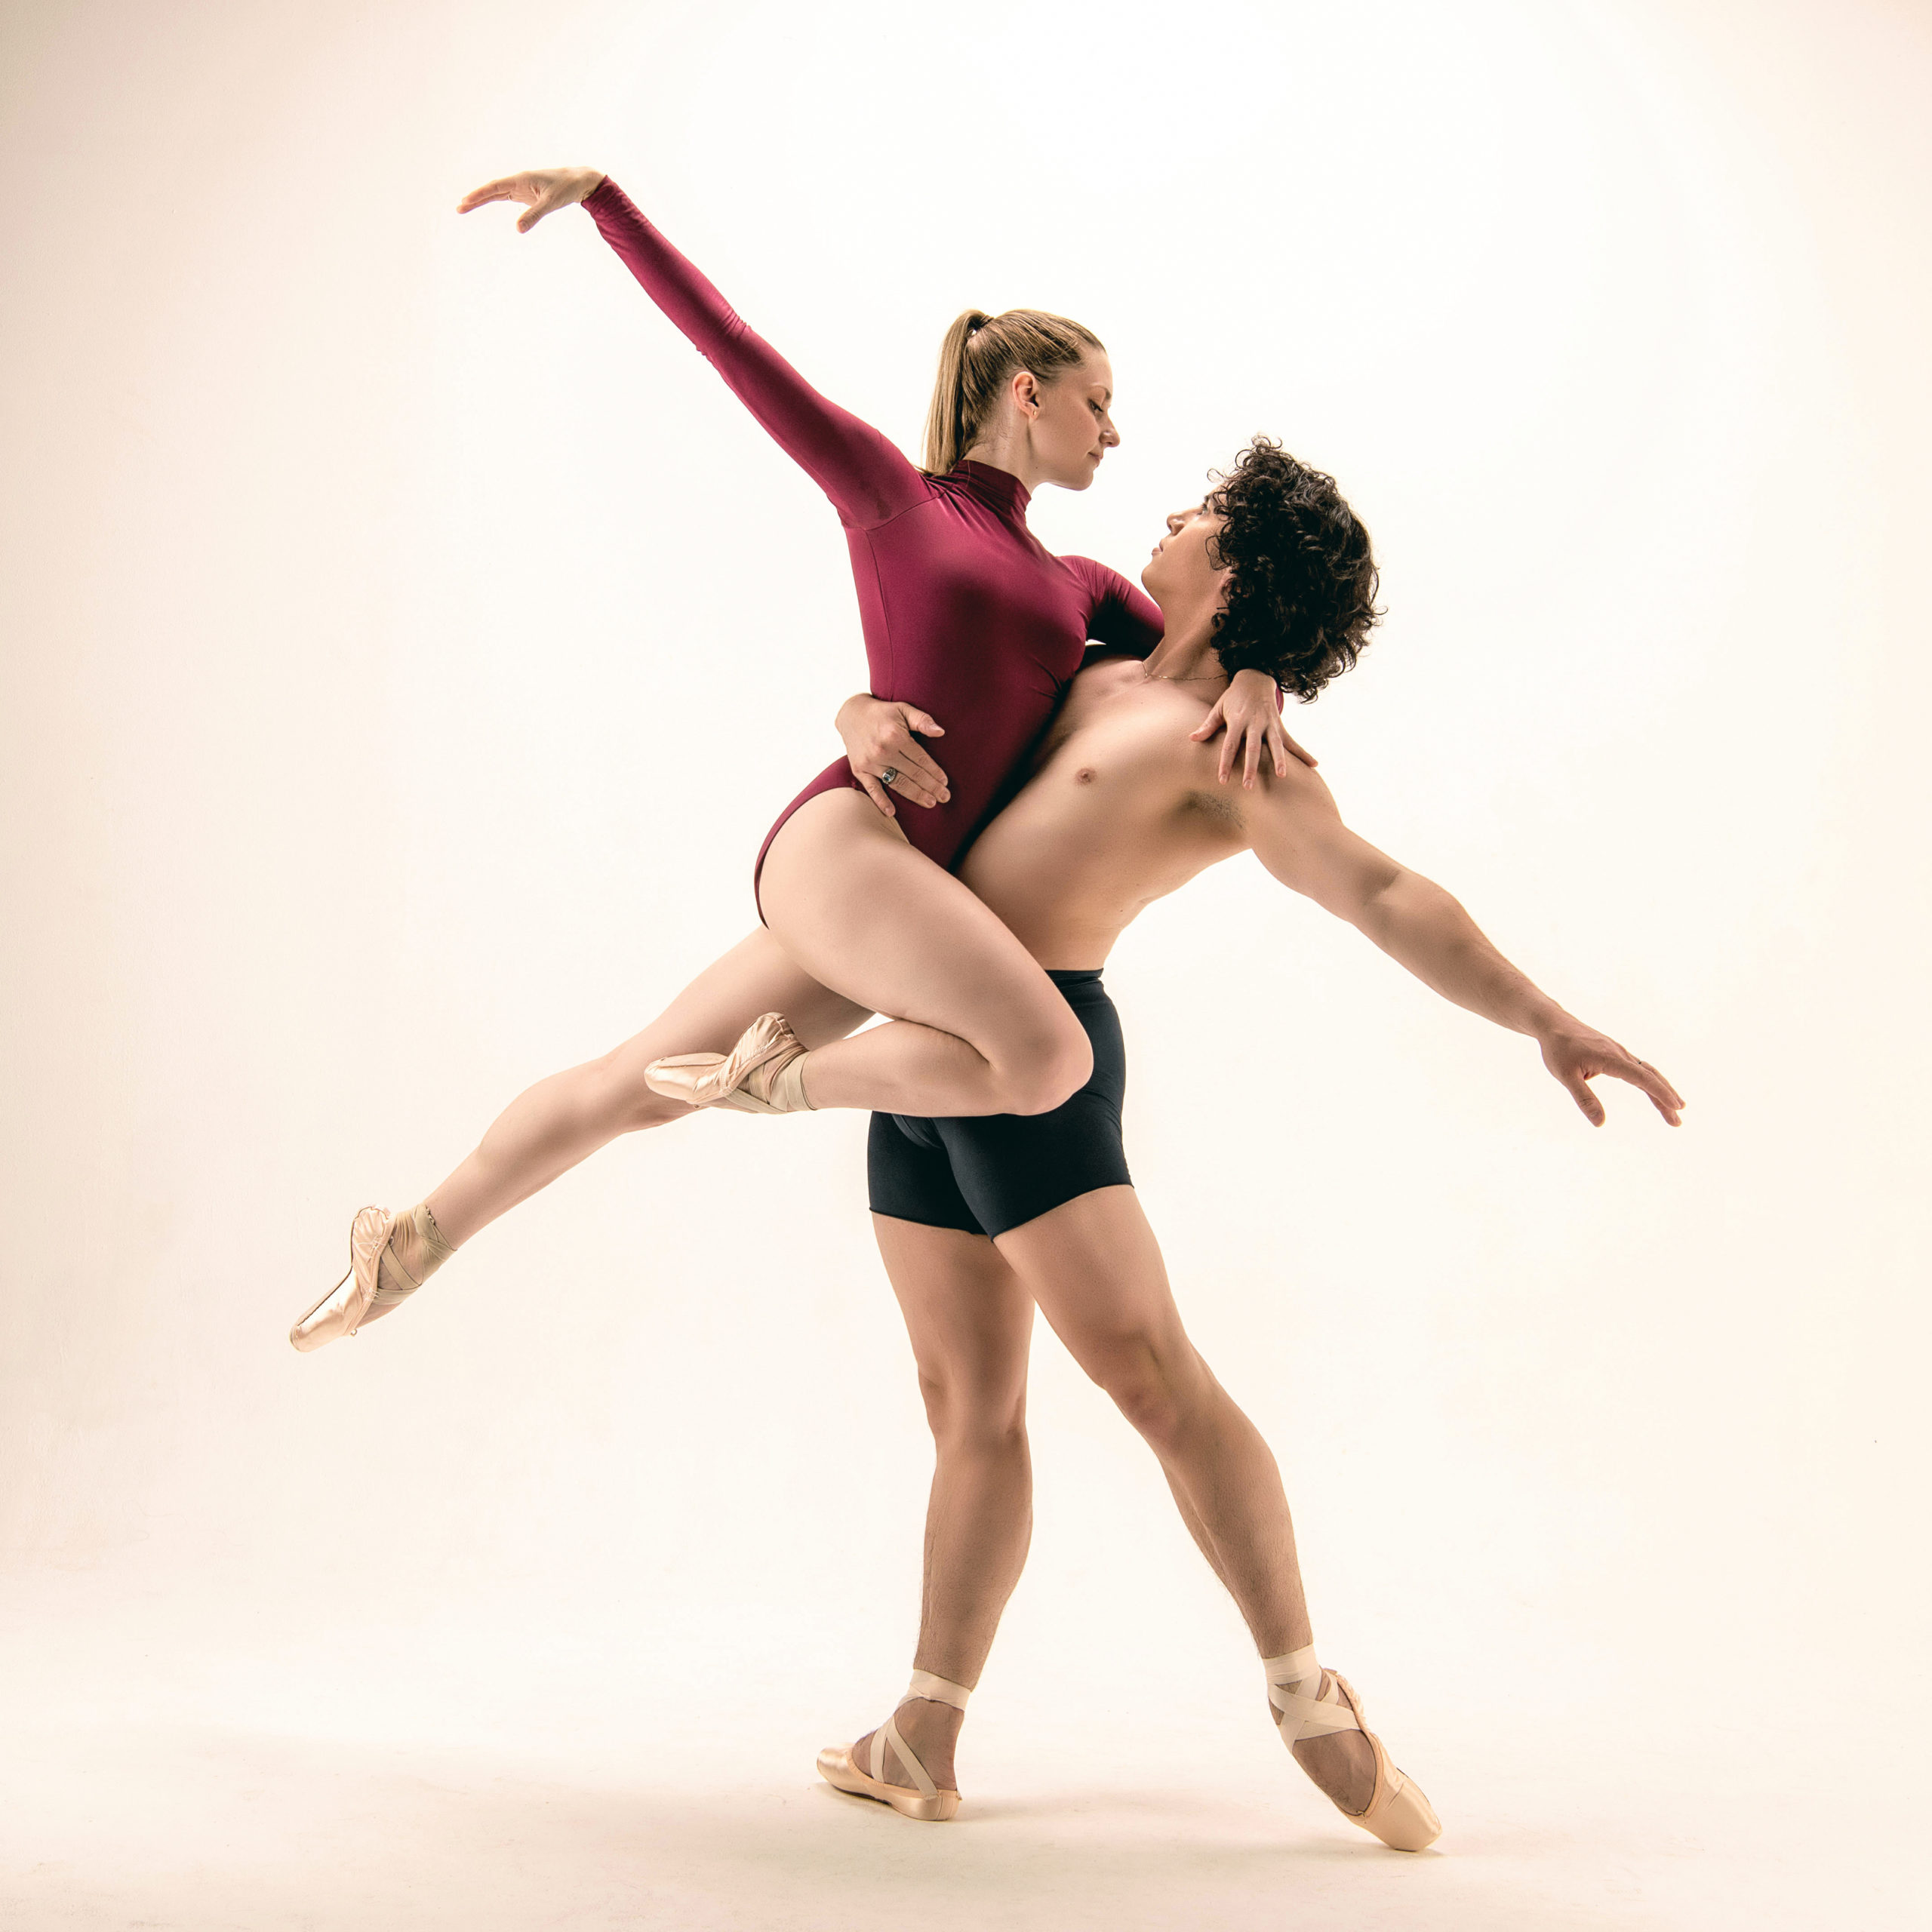 Theresa Knudson is blonde and Roberto Vega Ortiz has dark curly hair. They both wear pointe shoes, and Roberto is lifting Theresa.